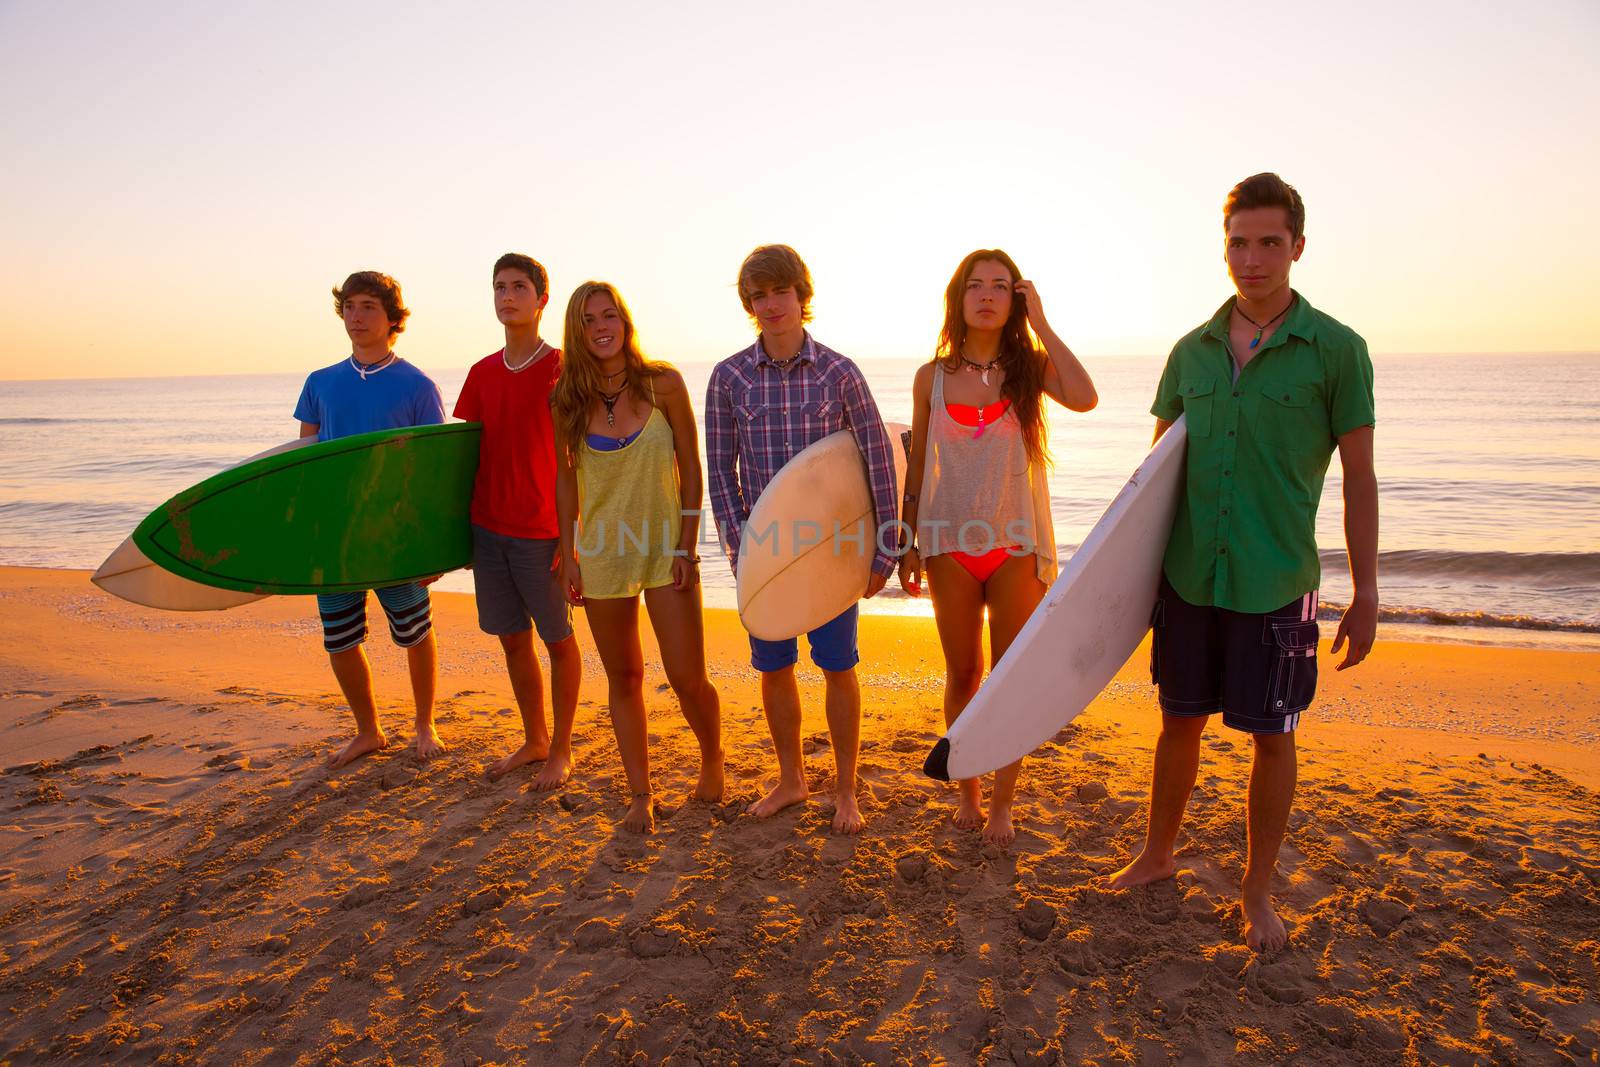 Surfers teen boys and girls group walking on beach at sunshine sunset backlight